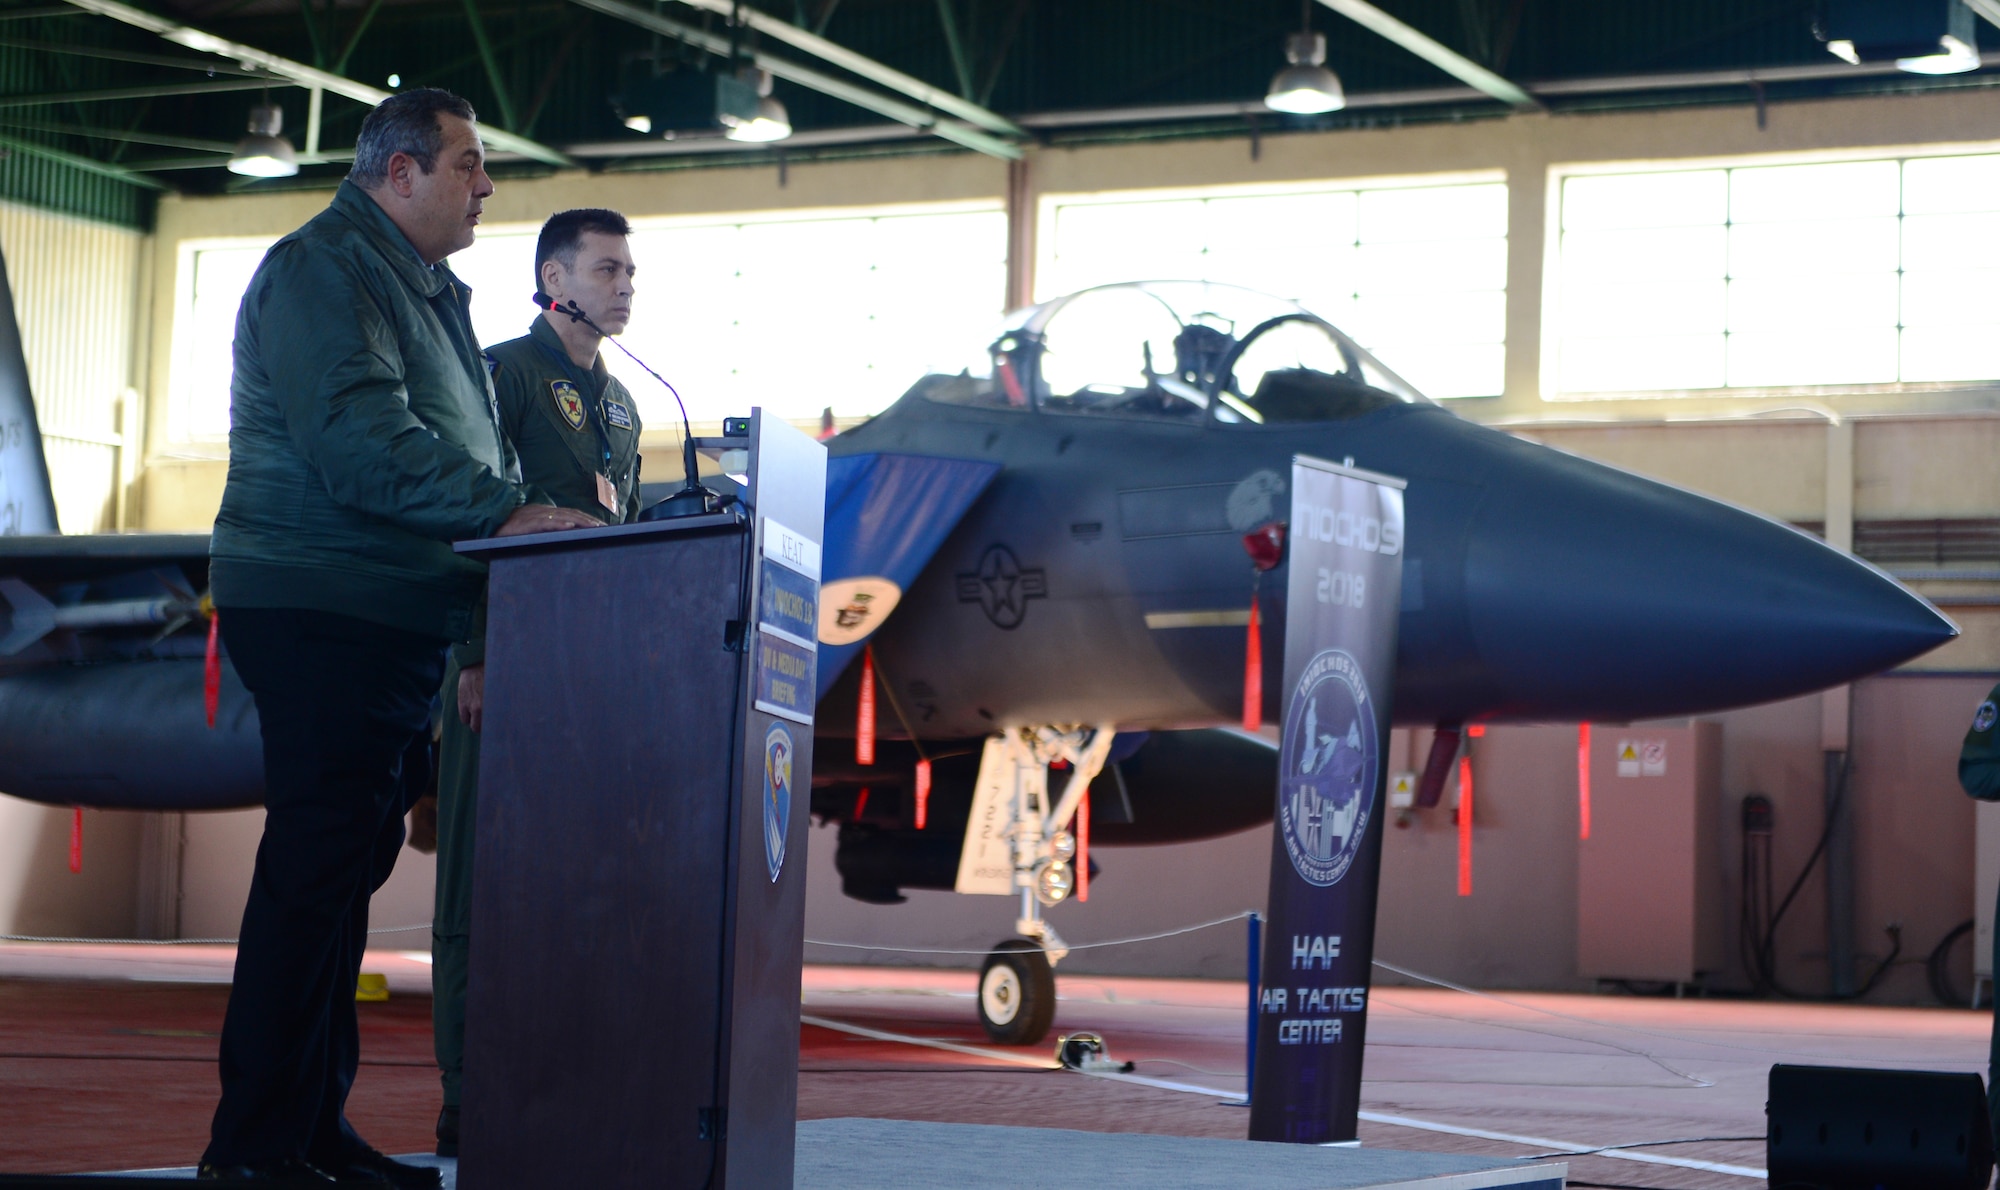 Greek Minister of Defence Panos Kammenos addresses distinguished guests and media in front of a 492nd Fighter Squadron F-15E Strike Eagle from Royal Air Force Lakenheath, England during an INIOHOS 18 event at Andravida Air Base, Greece, March 20, 2018. Thirteen F-15Es from the 492nd FS are participating alongside the Hellenic Air Force and other Allies and partner nations during the exercise. (U.S. Air Force photo/1st Lt. Elias Small)